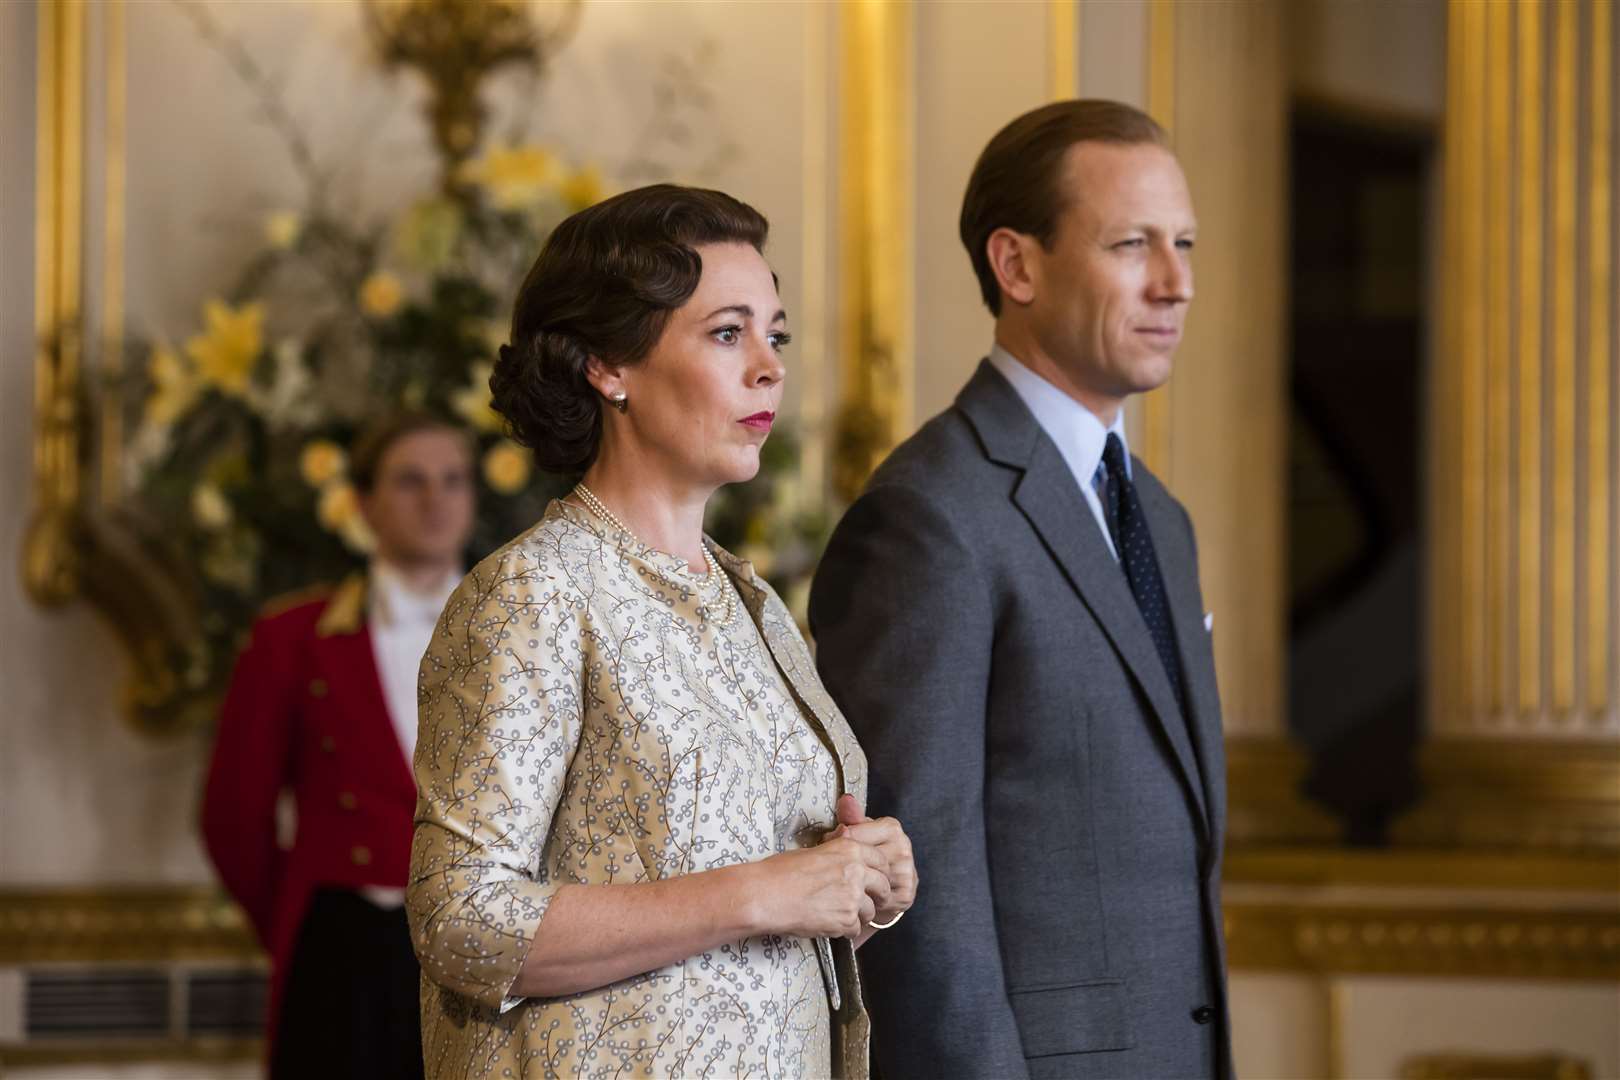 Tobias Menzies as Philip with Olivia Colman as the Queen (Netflix)